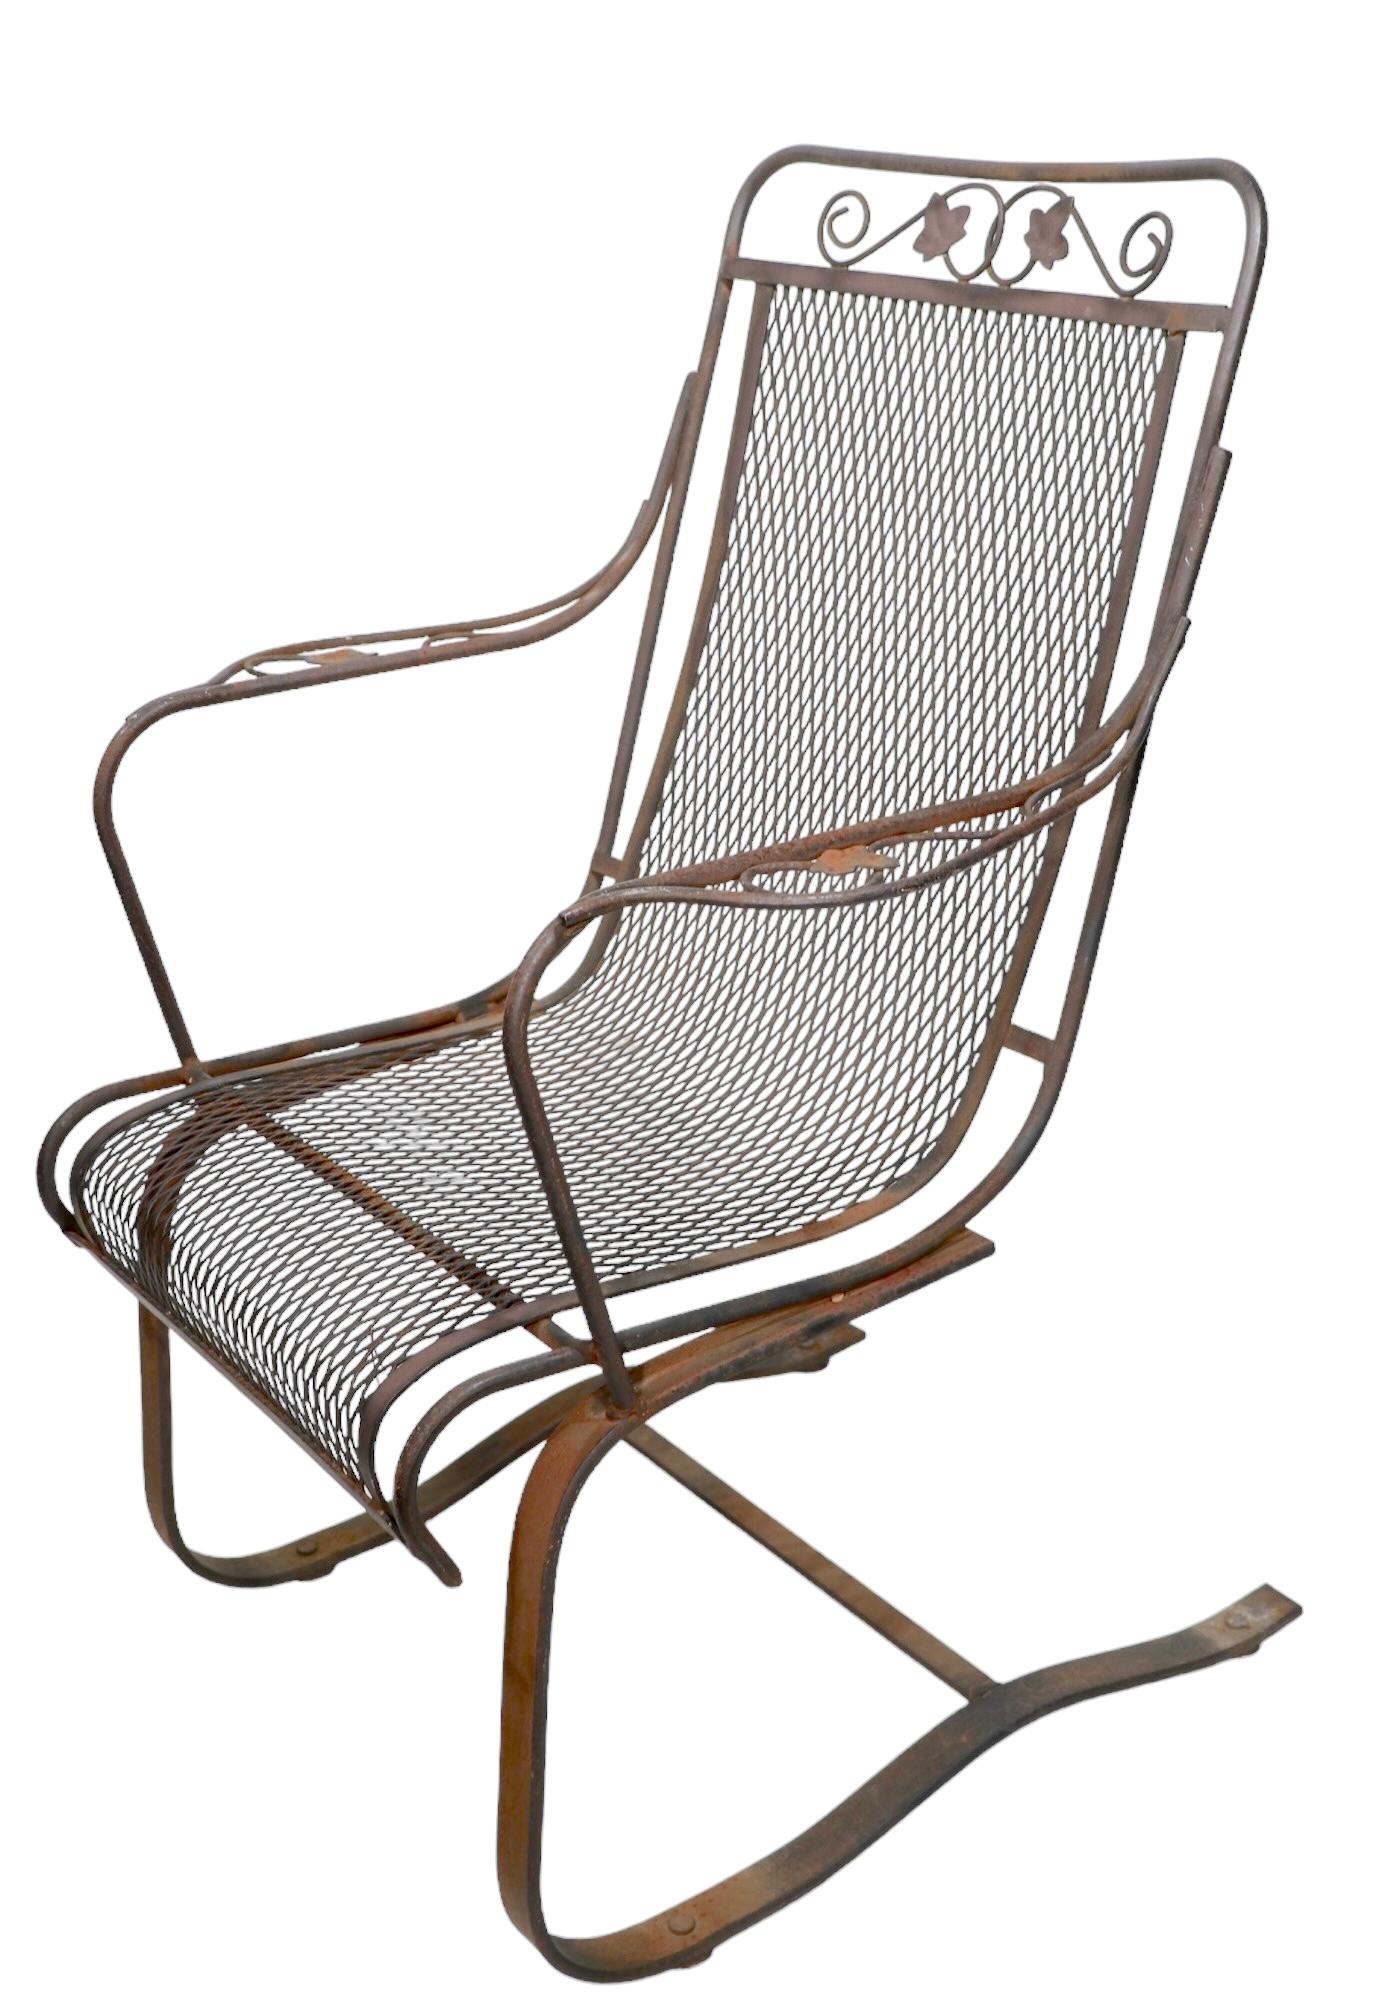 Classic vintage garden, patio, poolside high back lounge, arm chair, attributed to Salterini, or possibly Woodard. The chair features a wrought iron frame, with a continuous metal mesh seat and back rest, on a cantilevered spring base. The chair is